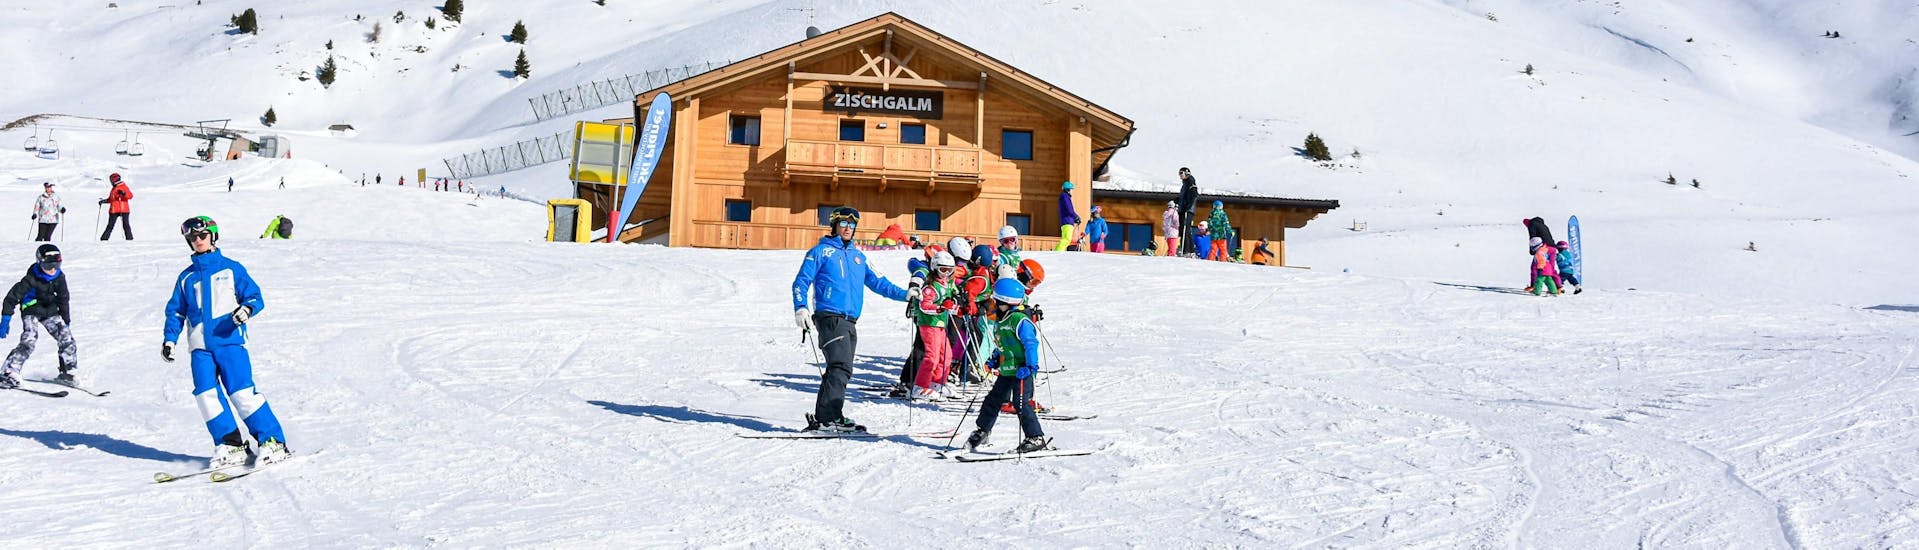 Kids Ski Lessons (6-14 y.) - Full Day - All levels.